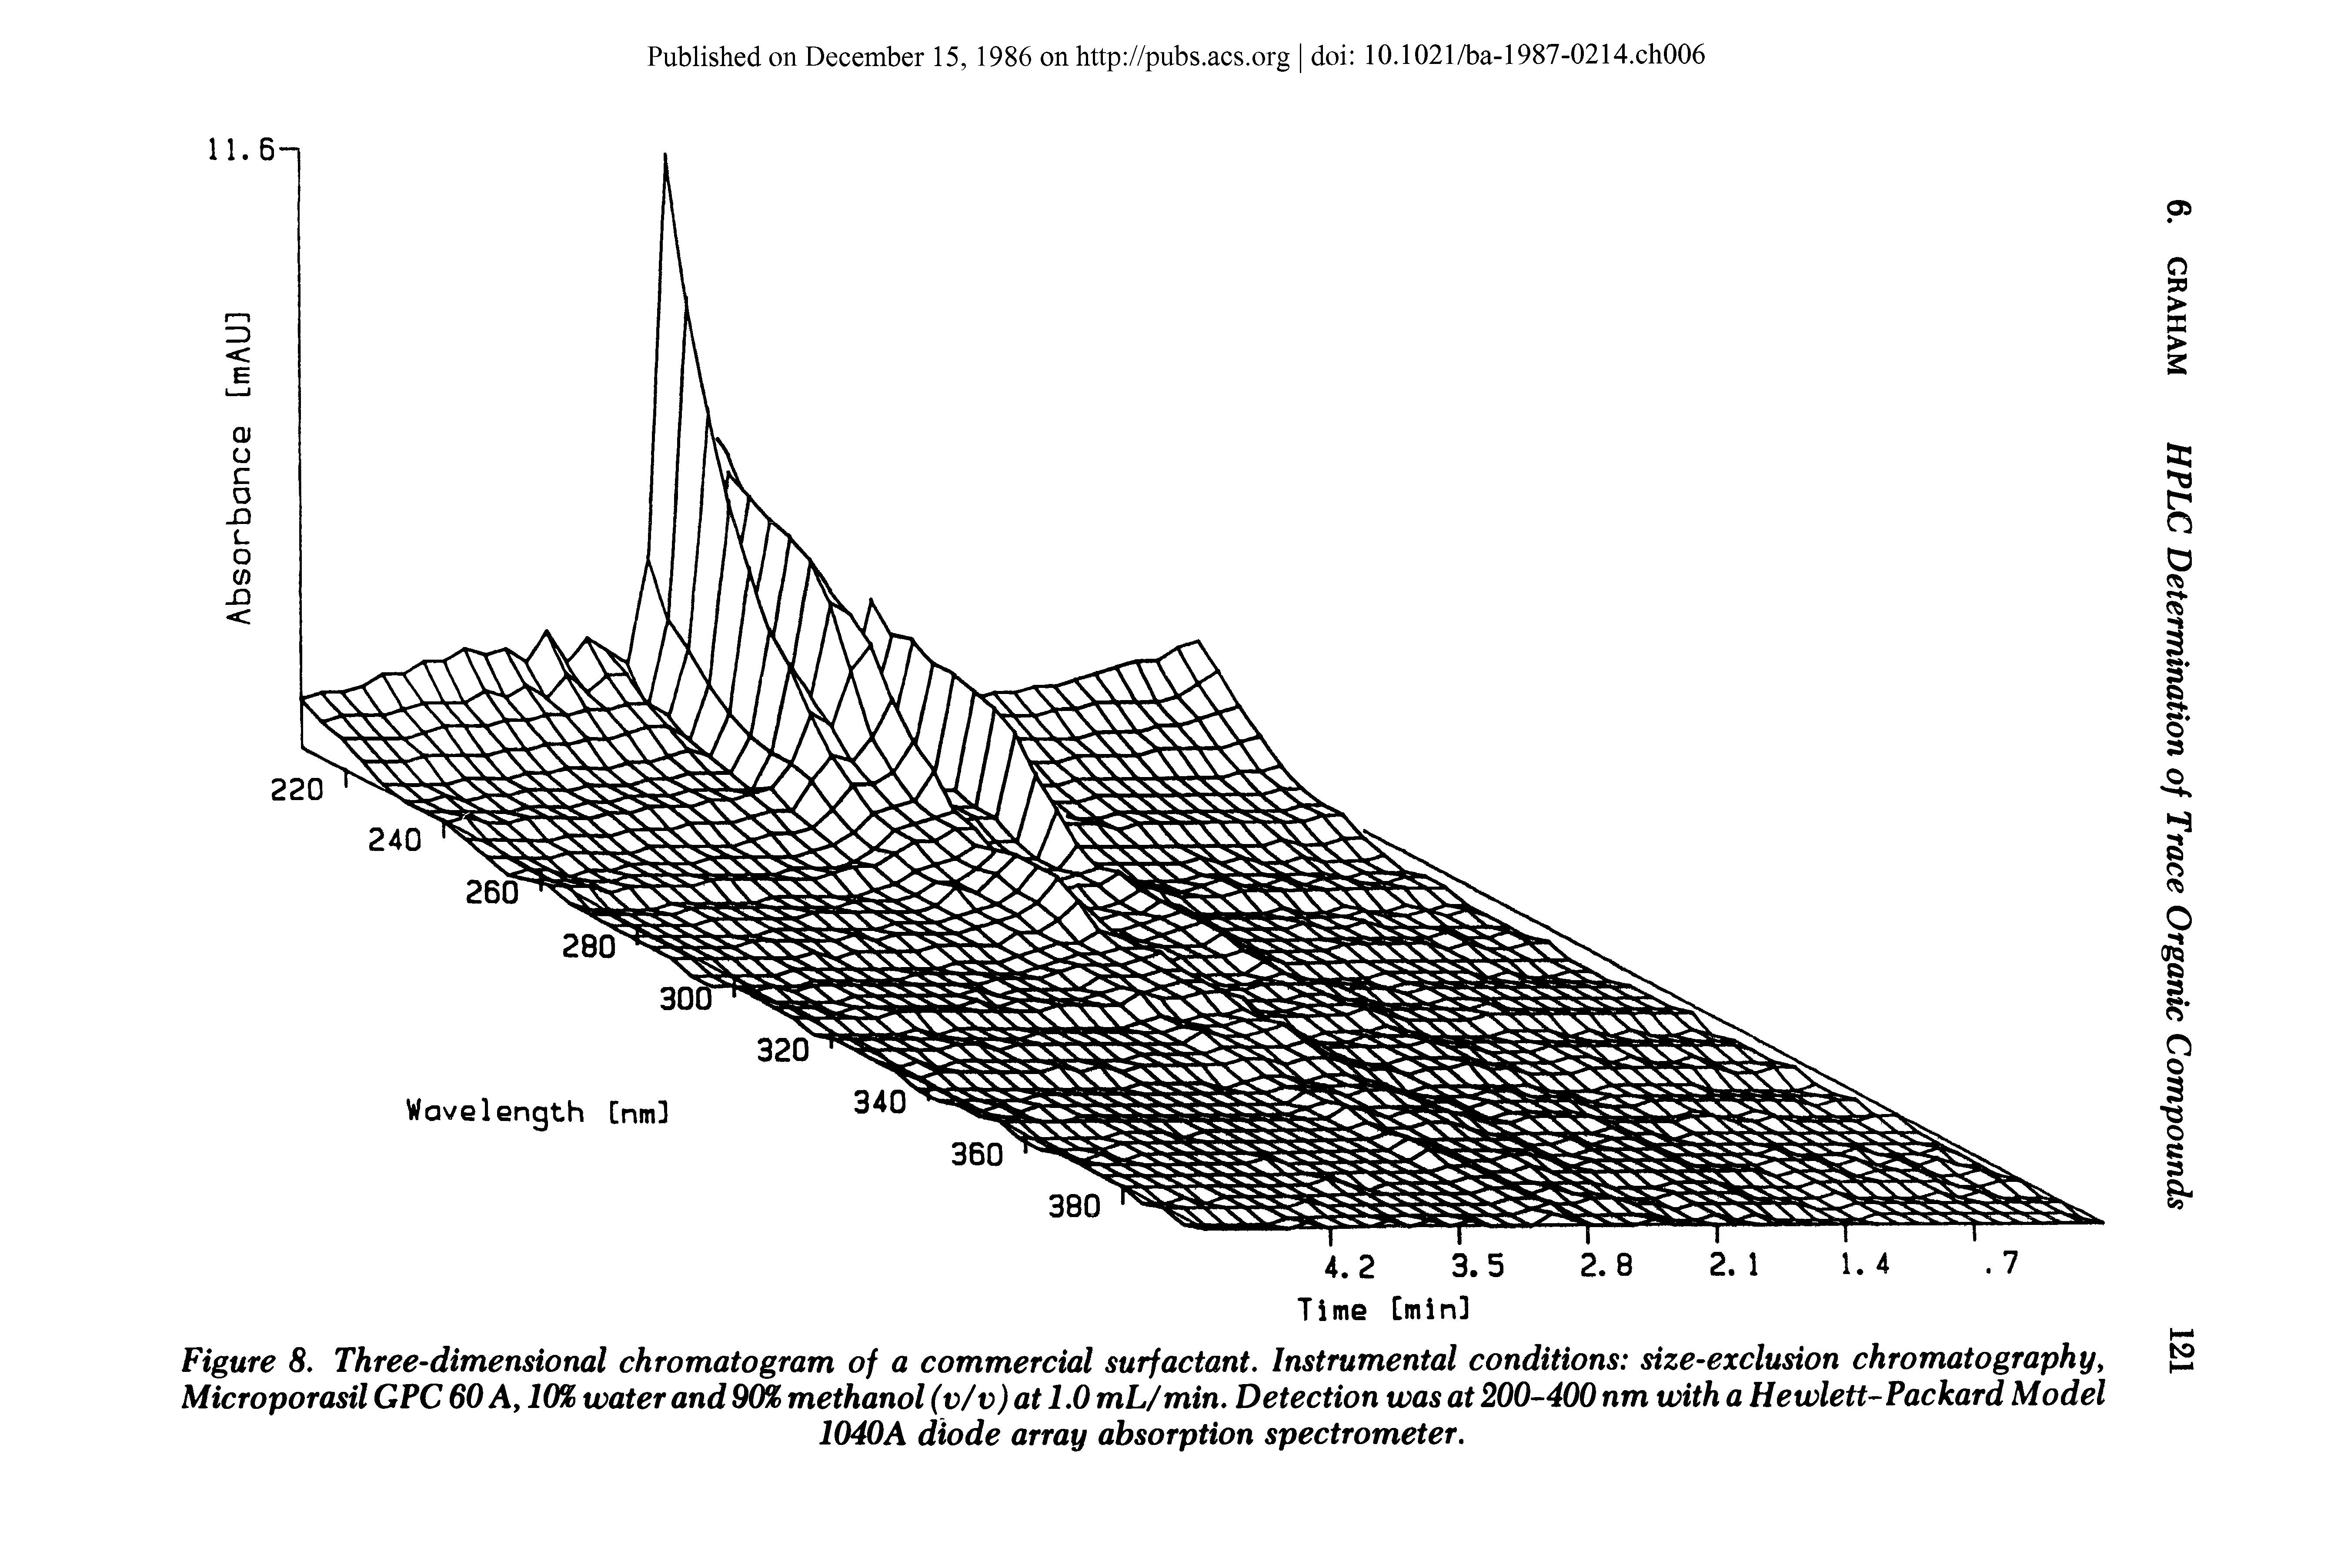 Figure 8. Three-dimensional chromatogram of a commercial surfactant. Instrumental conditions size-exclusion chromatography, Microporasil GPC 60 A, 10% water and 90% methanol (v/v) at 1.0 mL/min. Detection was at 200-400 nm with a Hewlett-Packard Model...